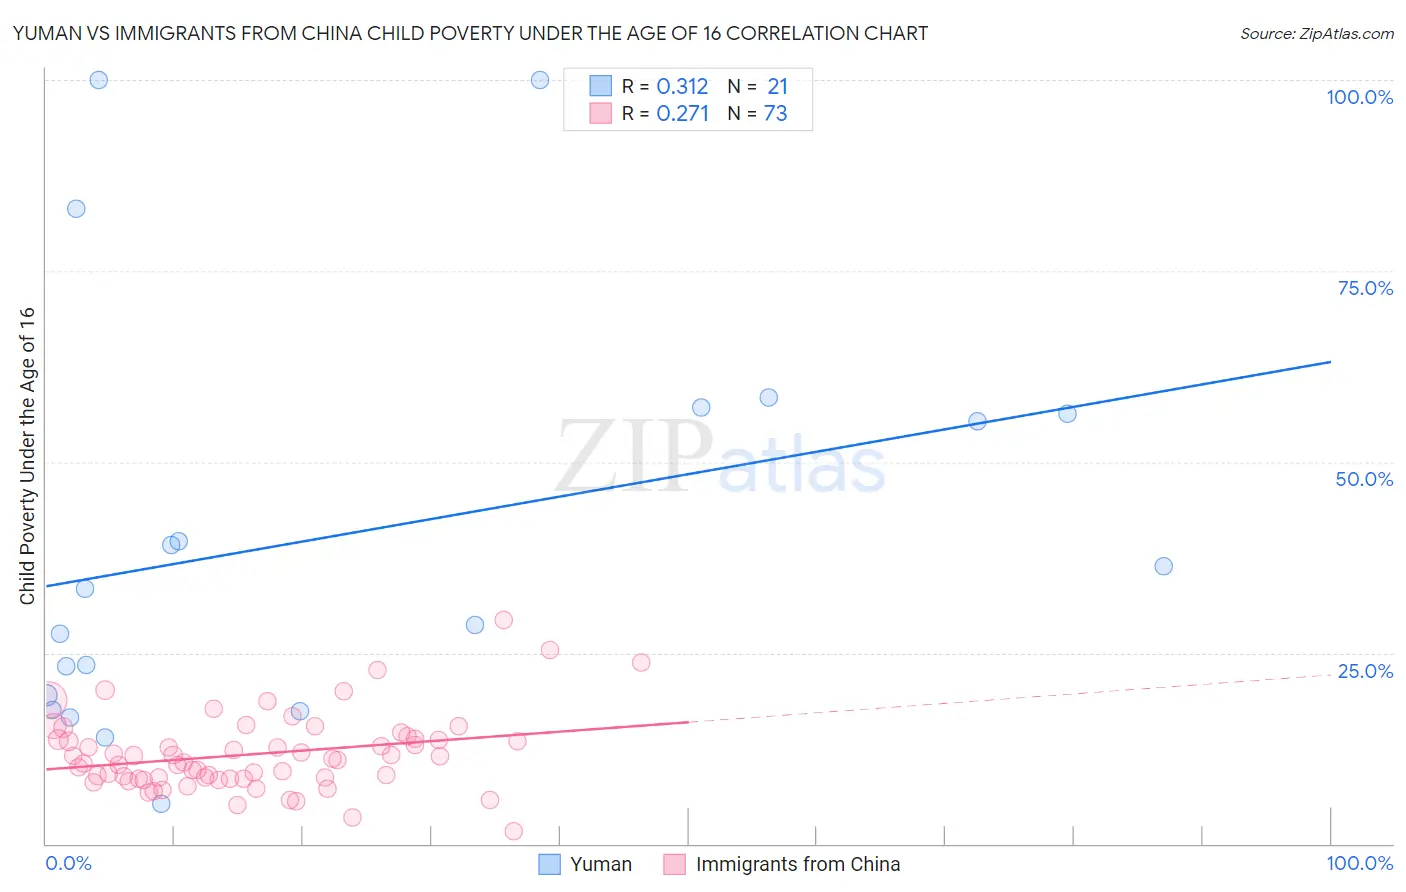 Yuman vs Immigrants from China Child Poverty Under the Age of 16